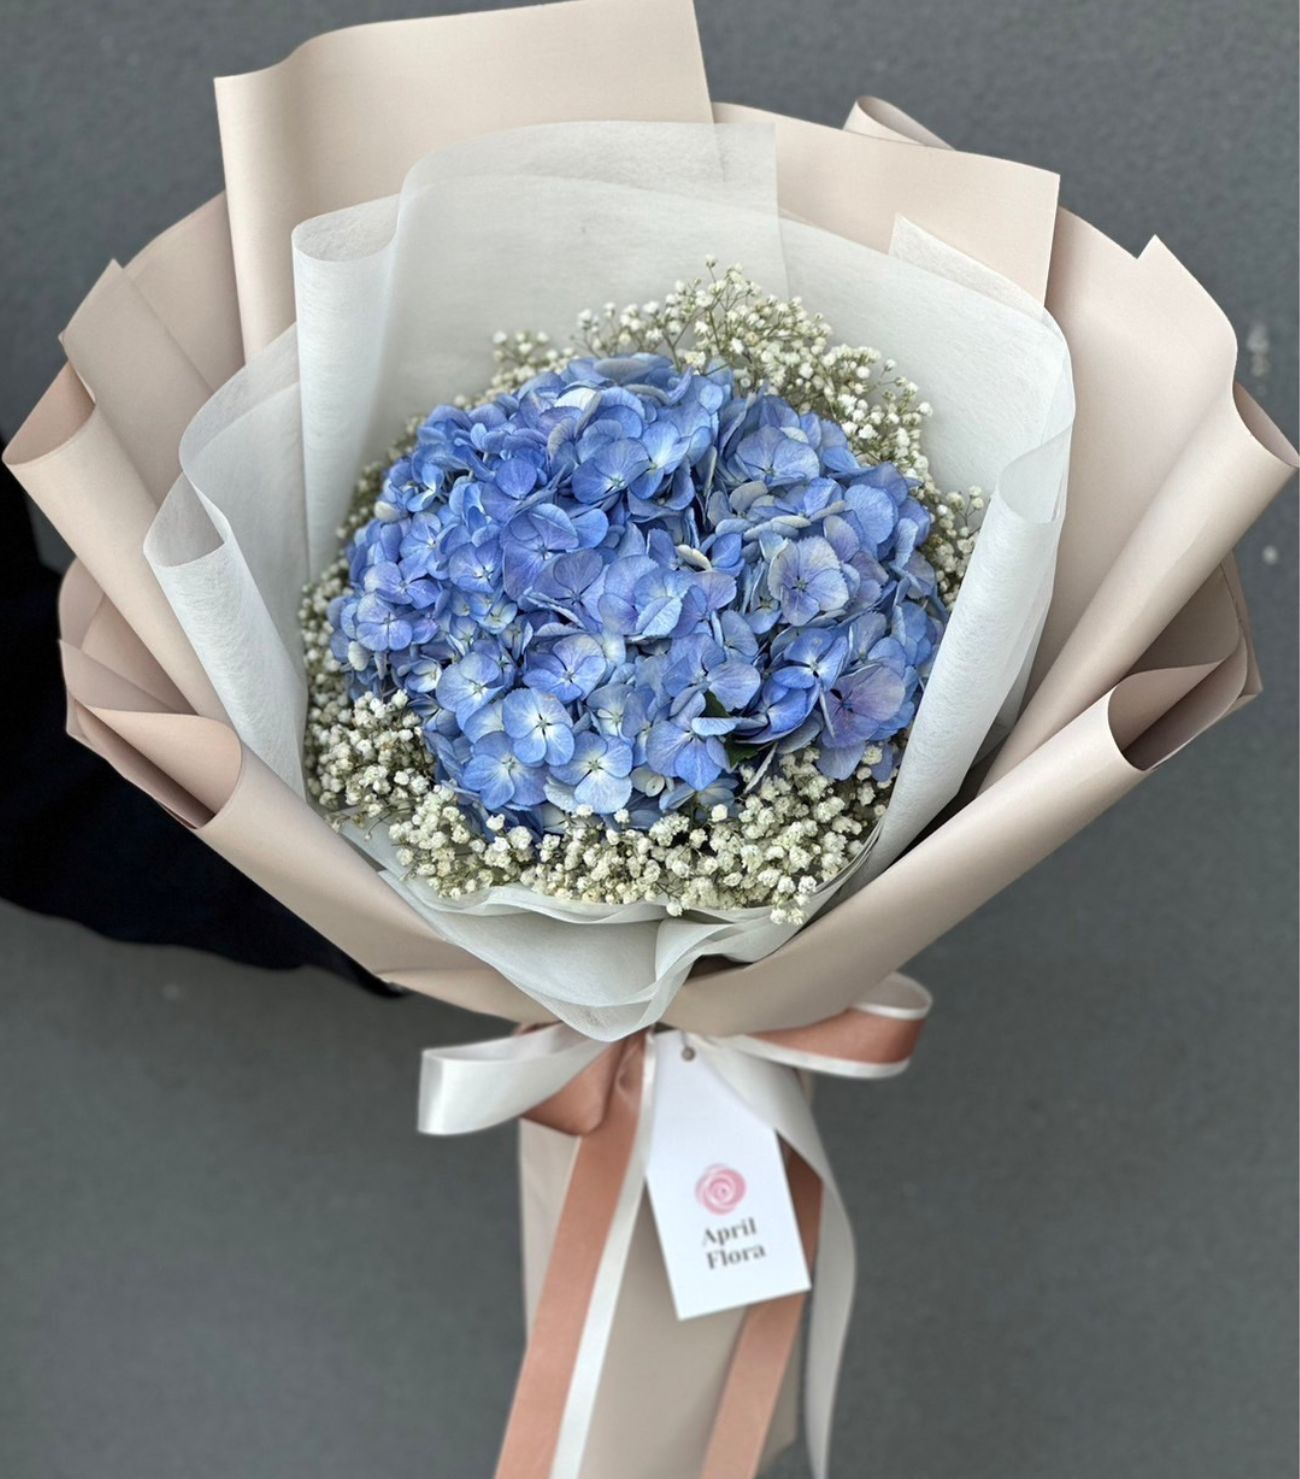 "Blue Love" bouquet of blue hydrangea and white gypso